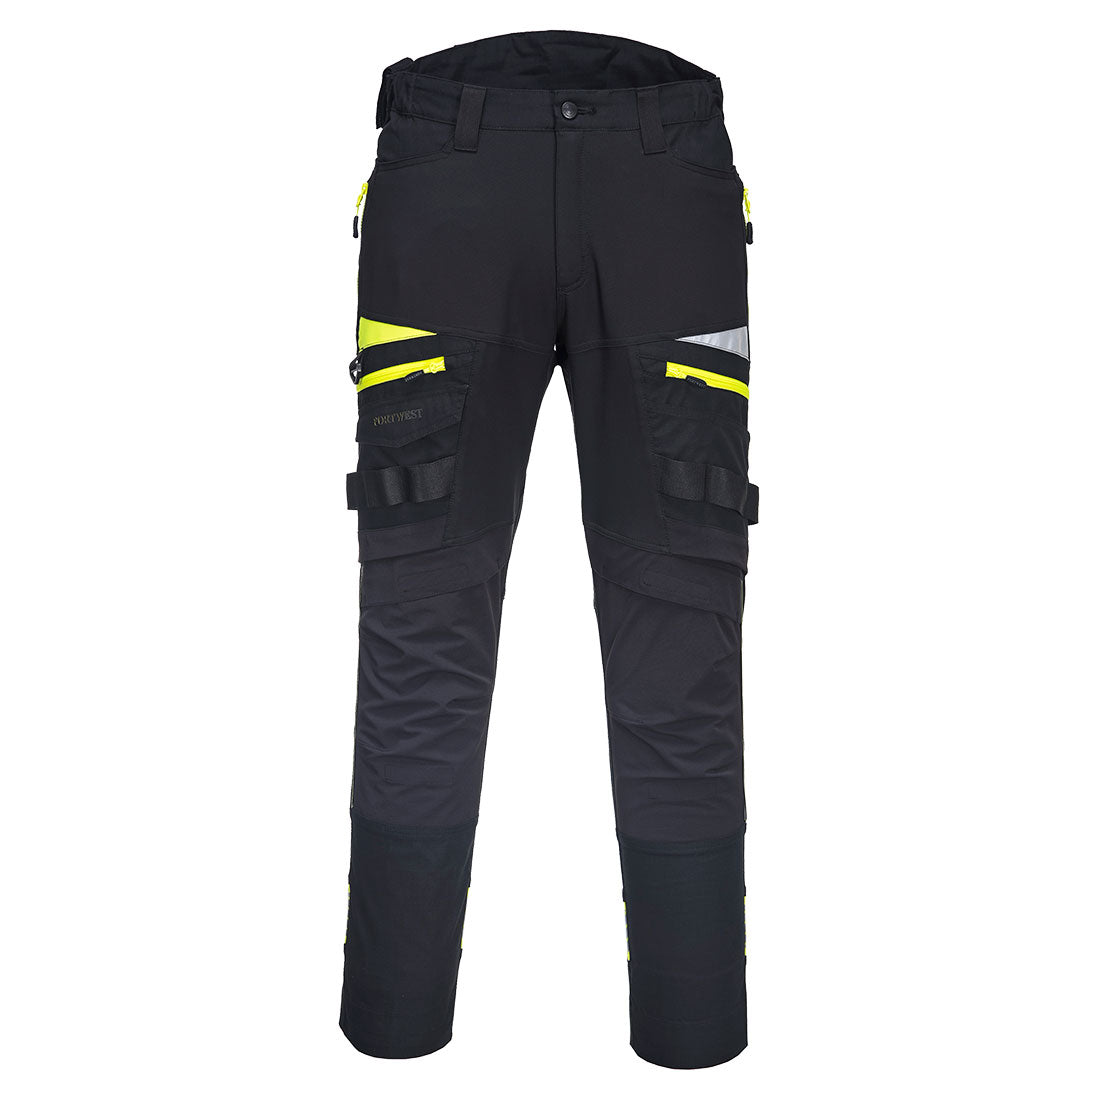 DX4 Work Trousers  (DX449)